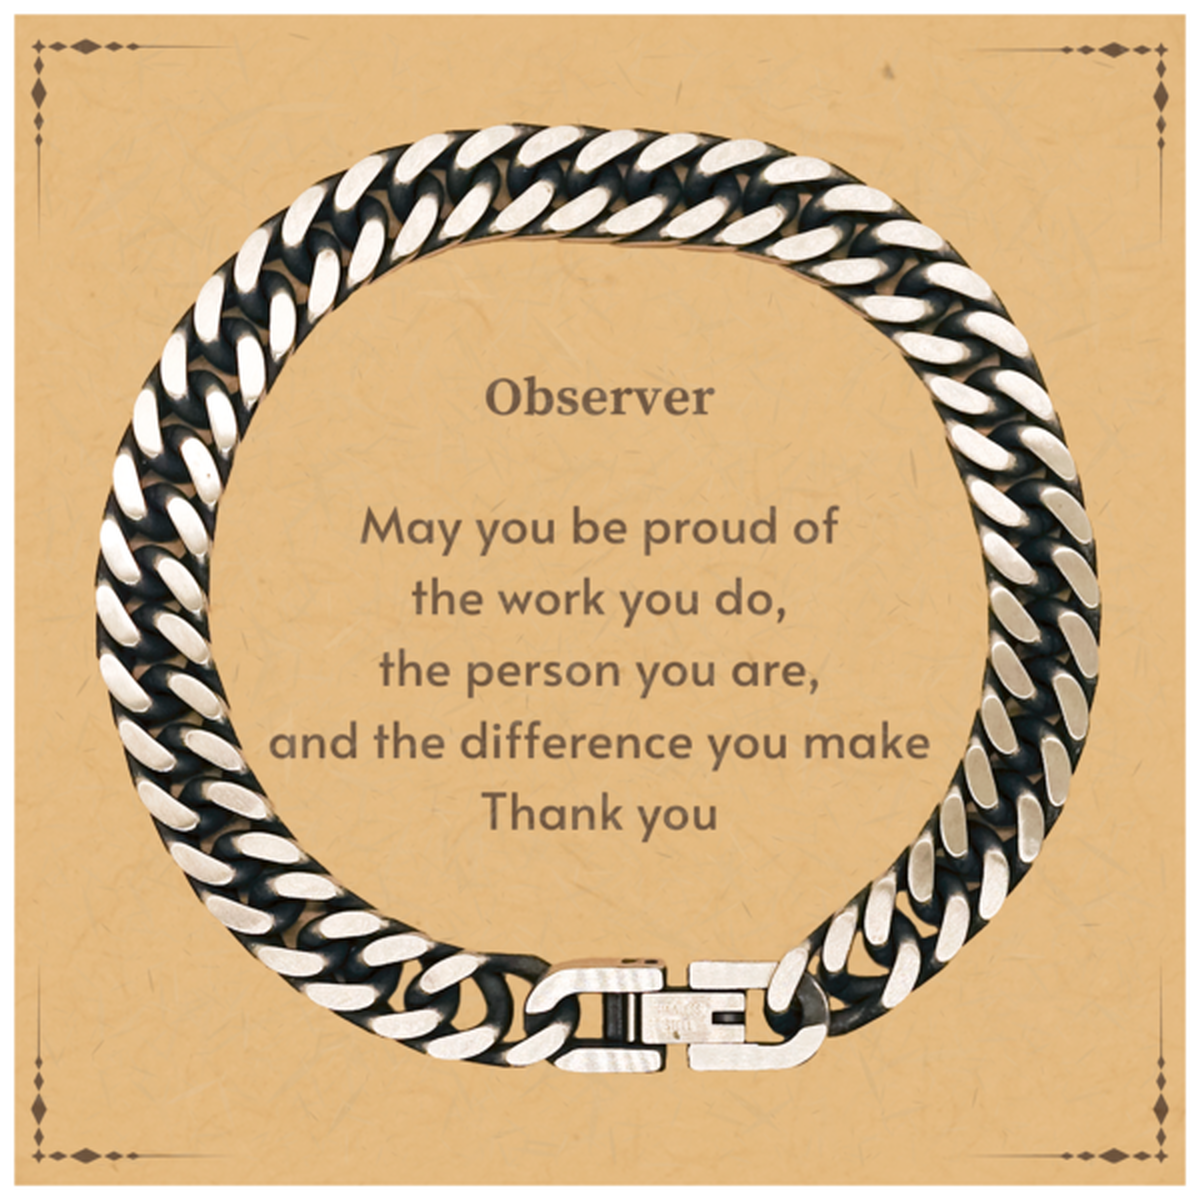 Heartwarming Cuban Link Chain Bracelet Retirement Coworkers Gifts for Observer, Observer May You be proud of the work you do, the person you are Gifts for Boss Men Women Friends